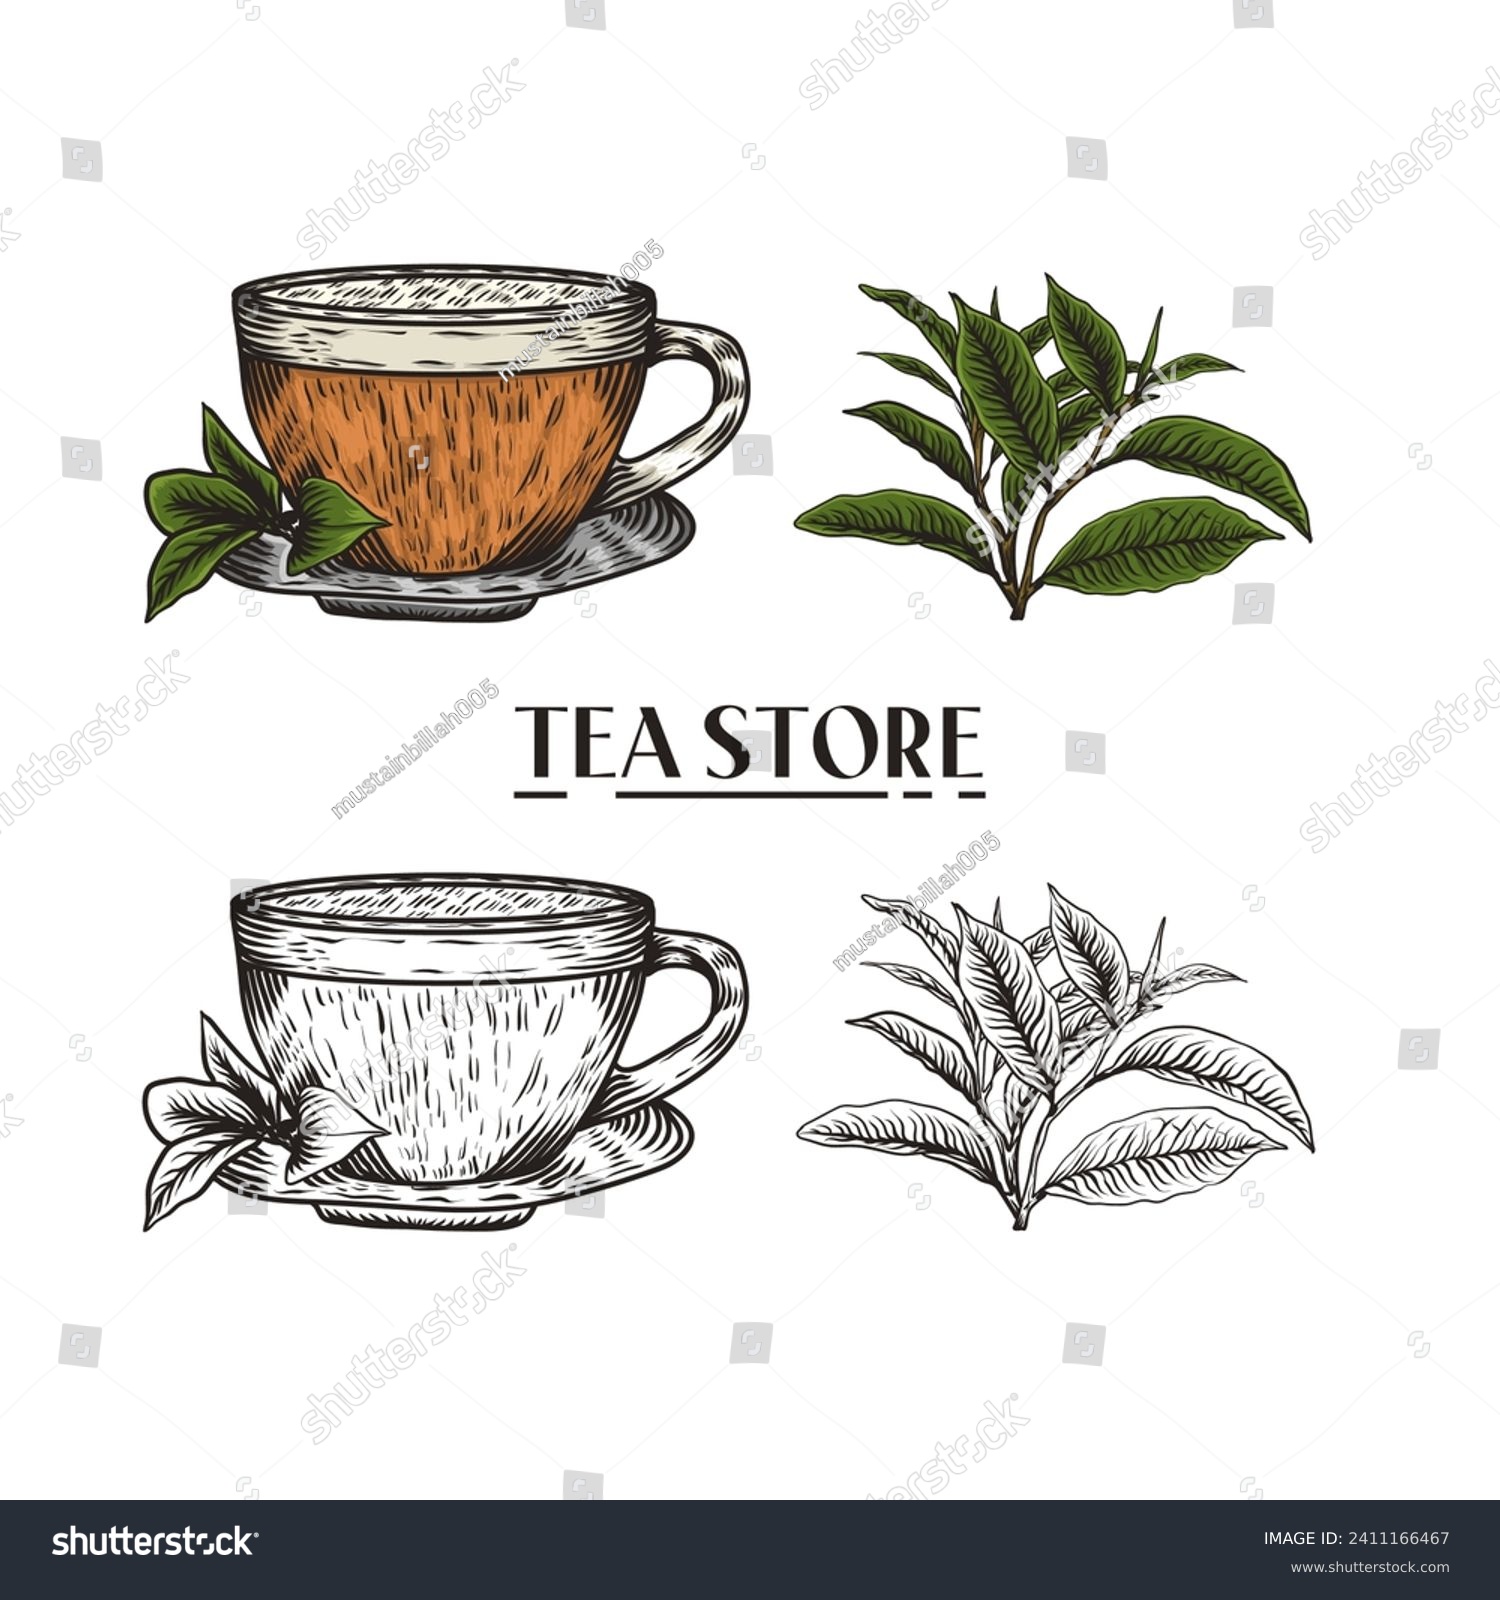 Hand drawn tea cup and tea leaf illustration in engraving style for menu or cafe. #2411166467